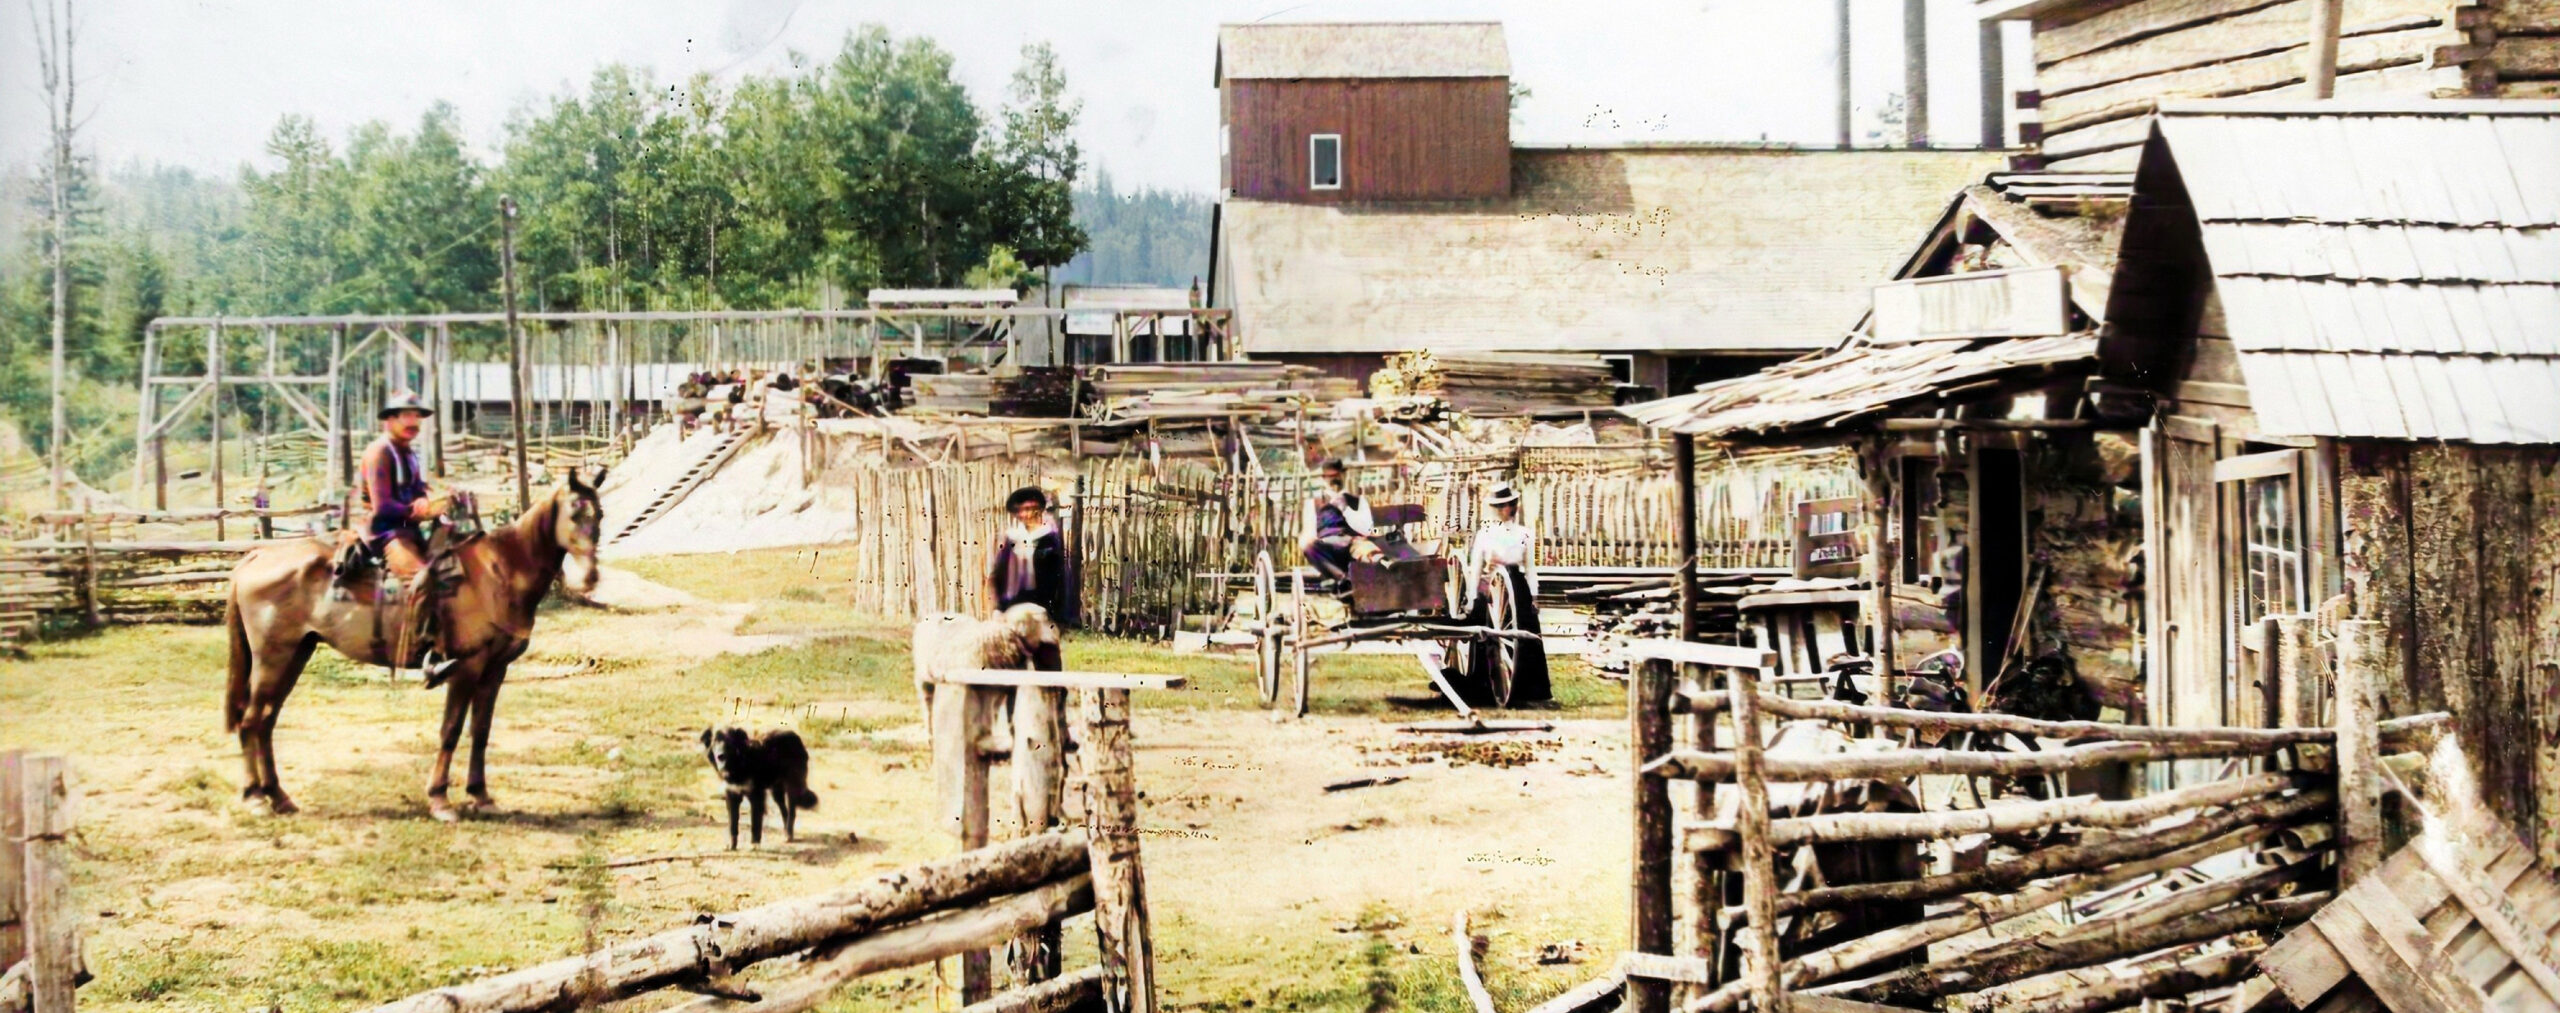 Man on horseback, dog and buggy in front of wooden buildings and fences